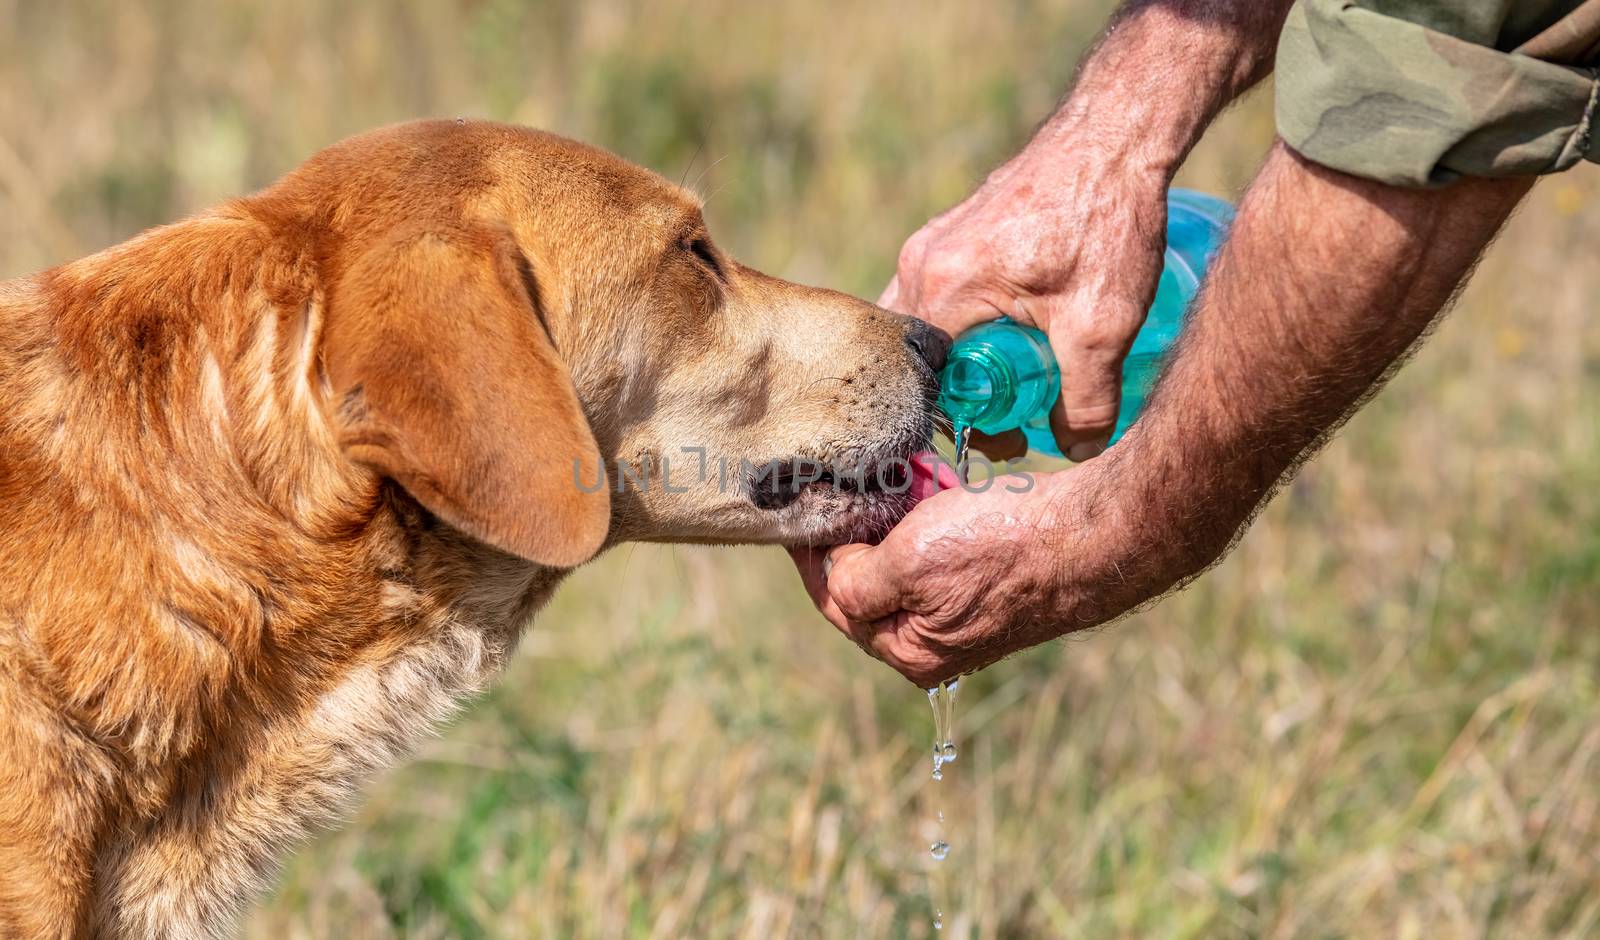 A shot of a hunter giving water to his hound dog in the countryside. Close up view. Blurred background.